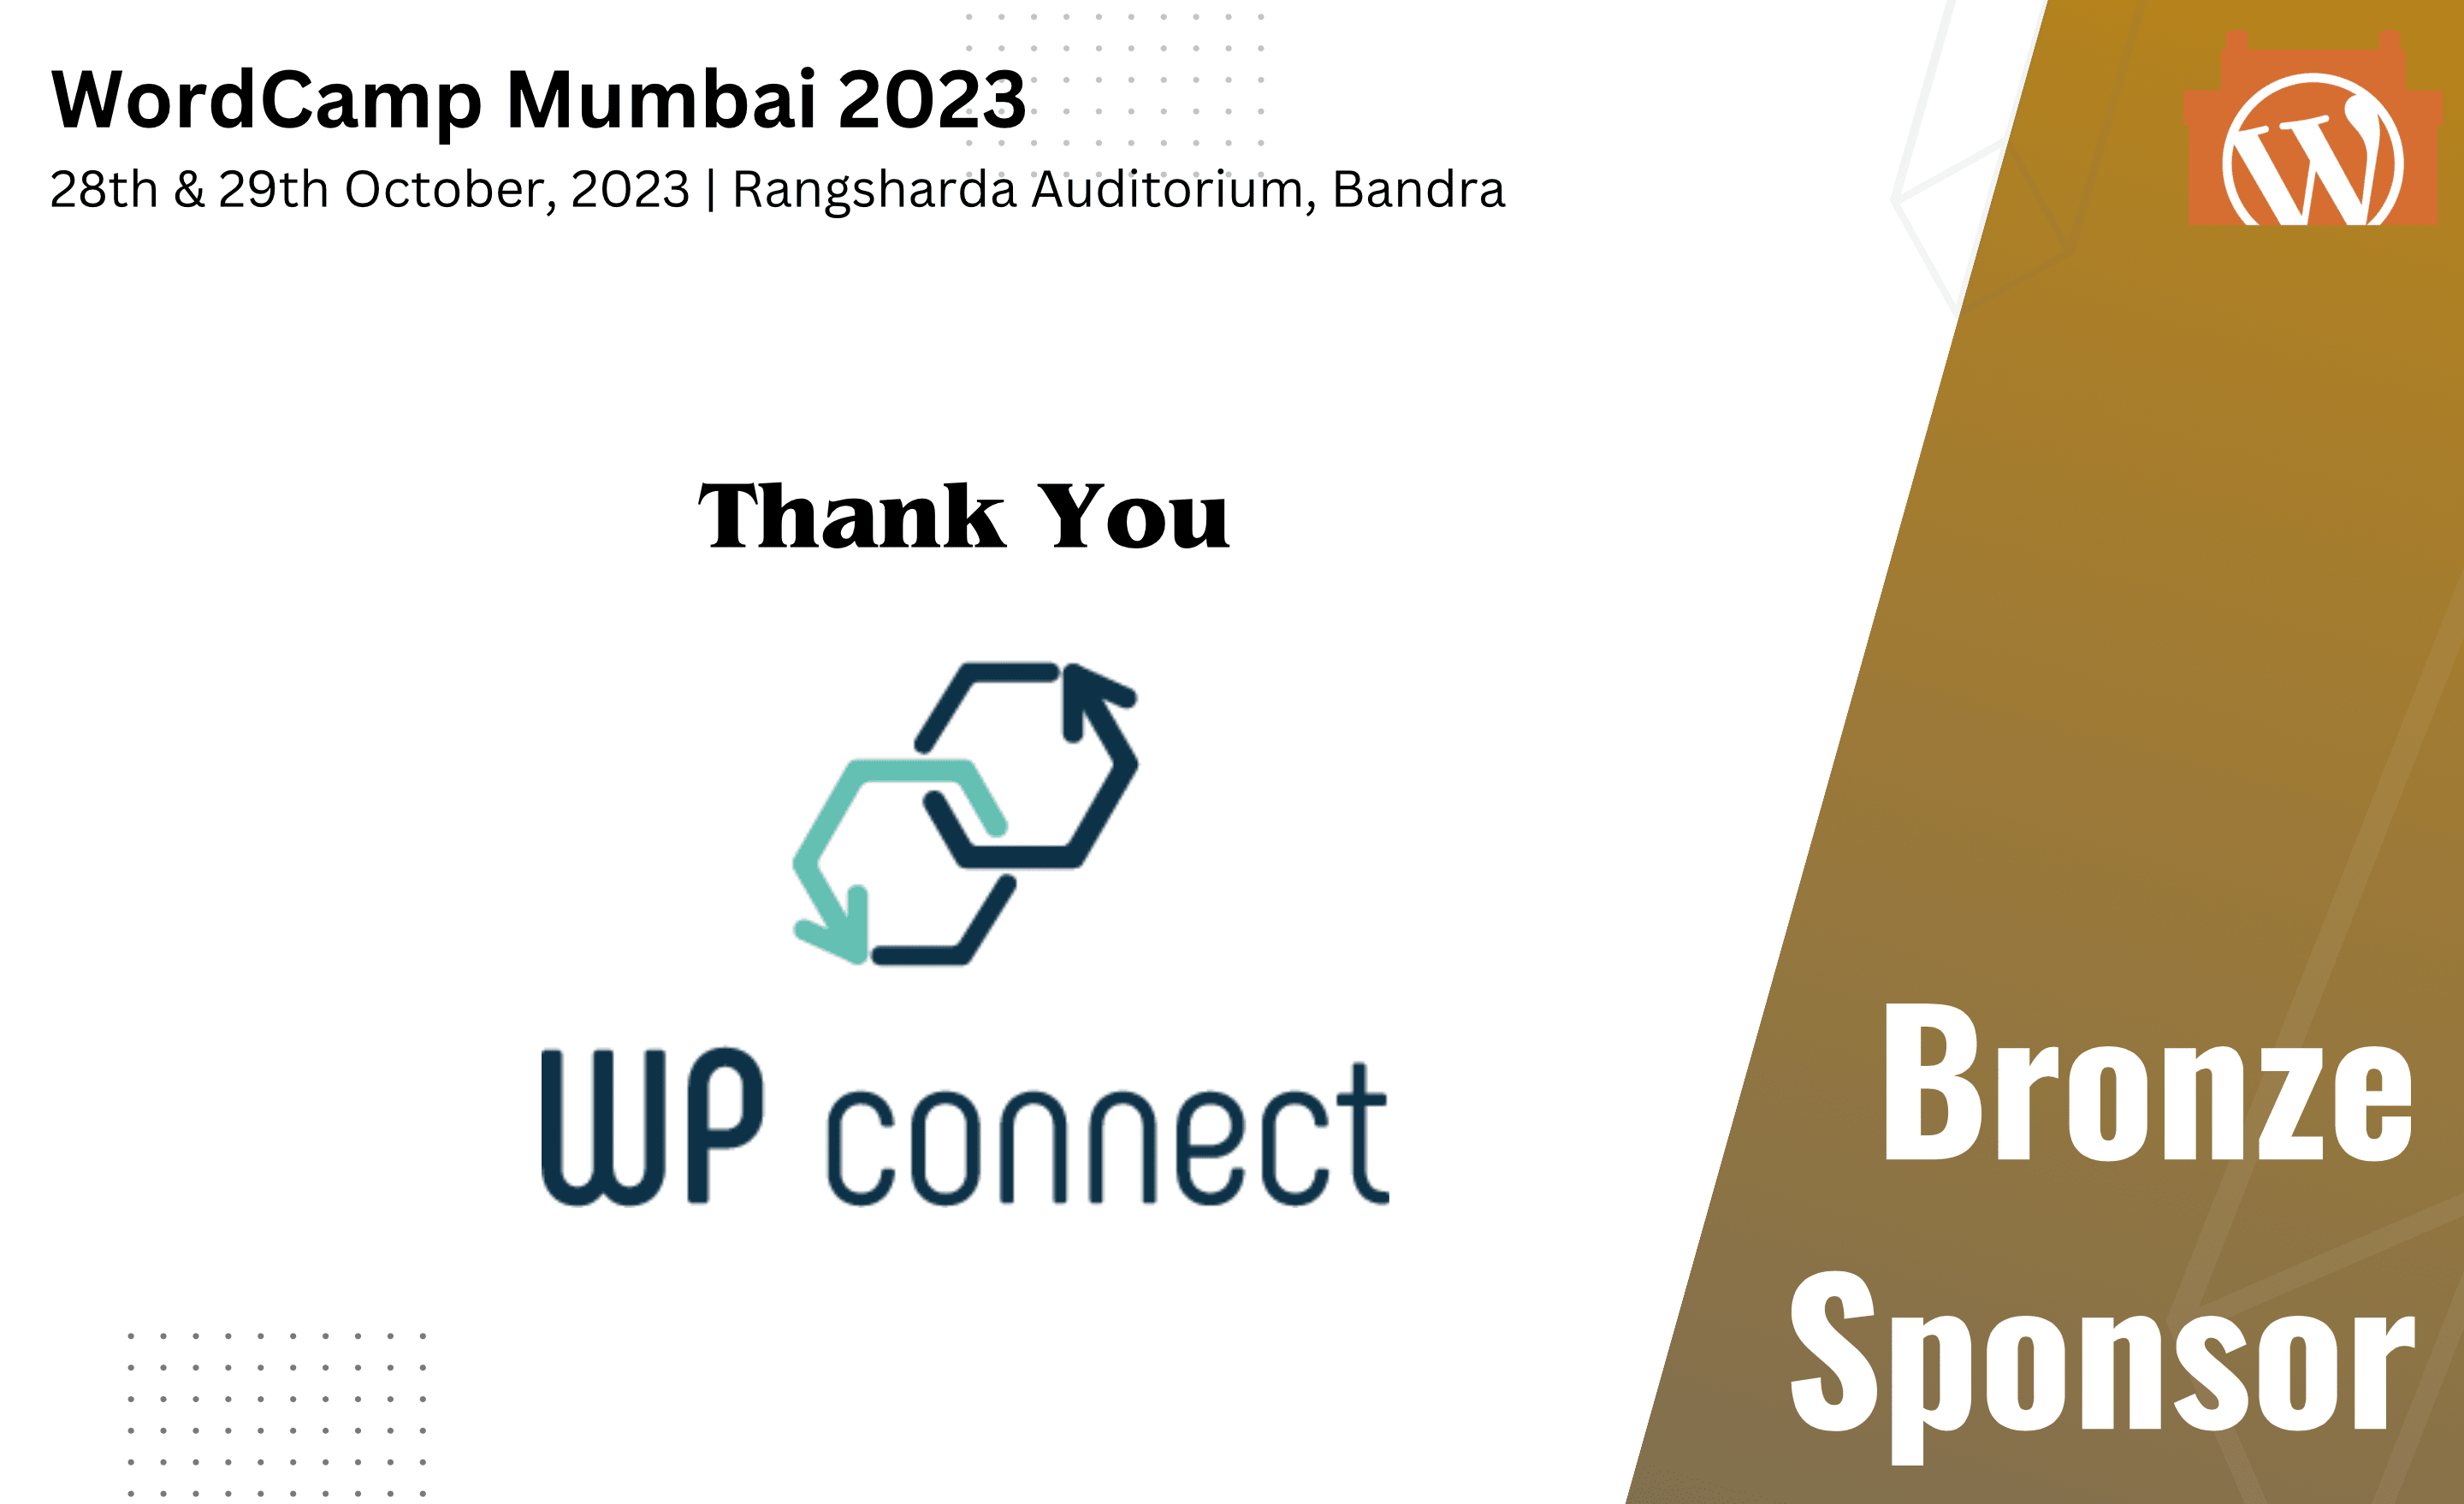 Thank You WP Connect, for being our Bronze Sponsor